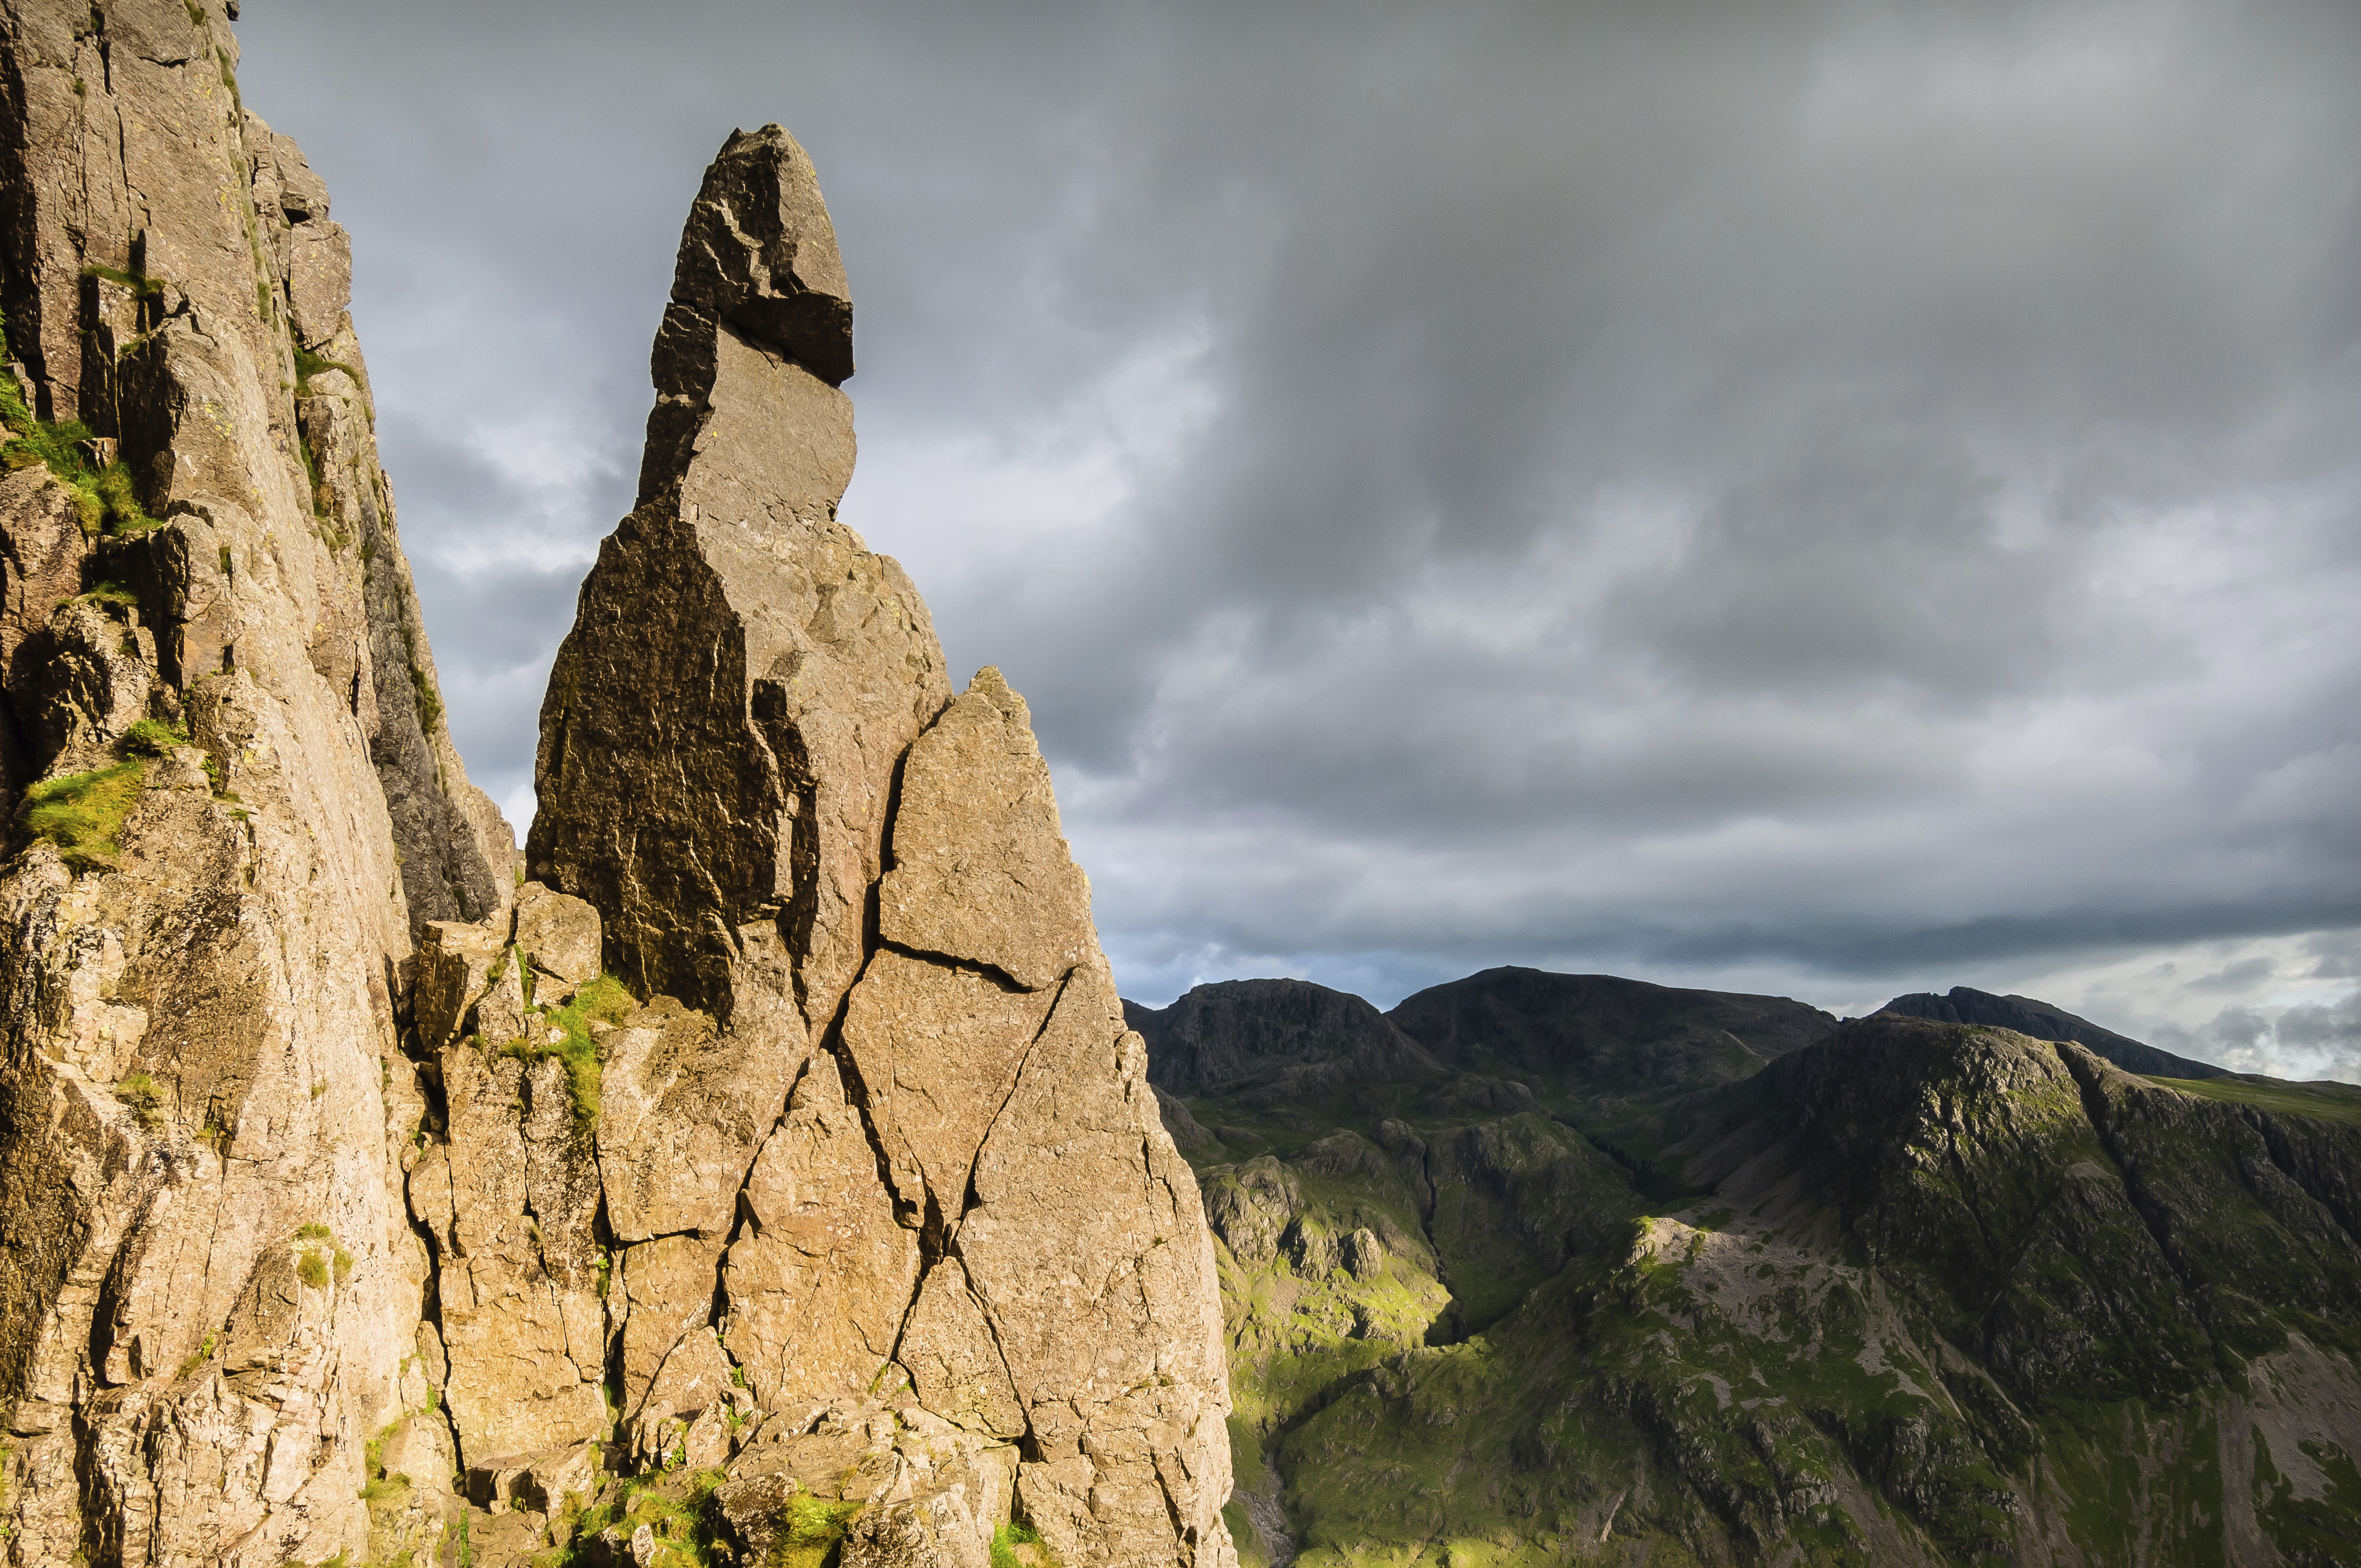 Napes Needle situated on the southern flank of Great Gable